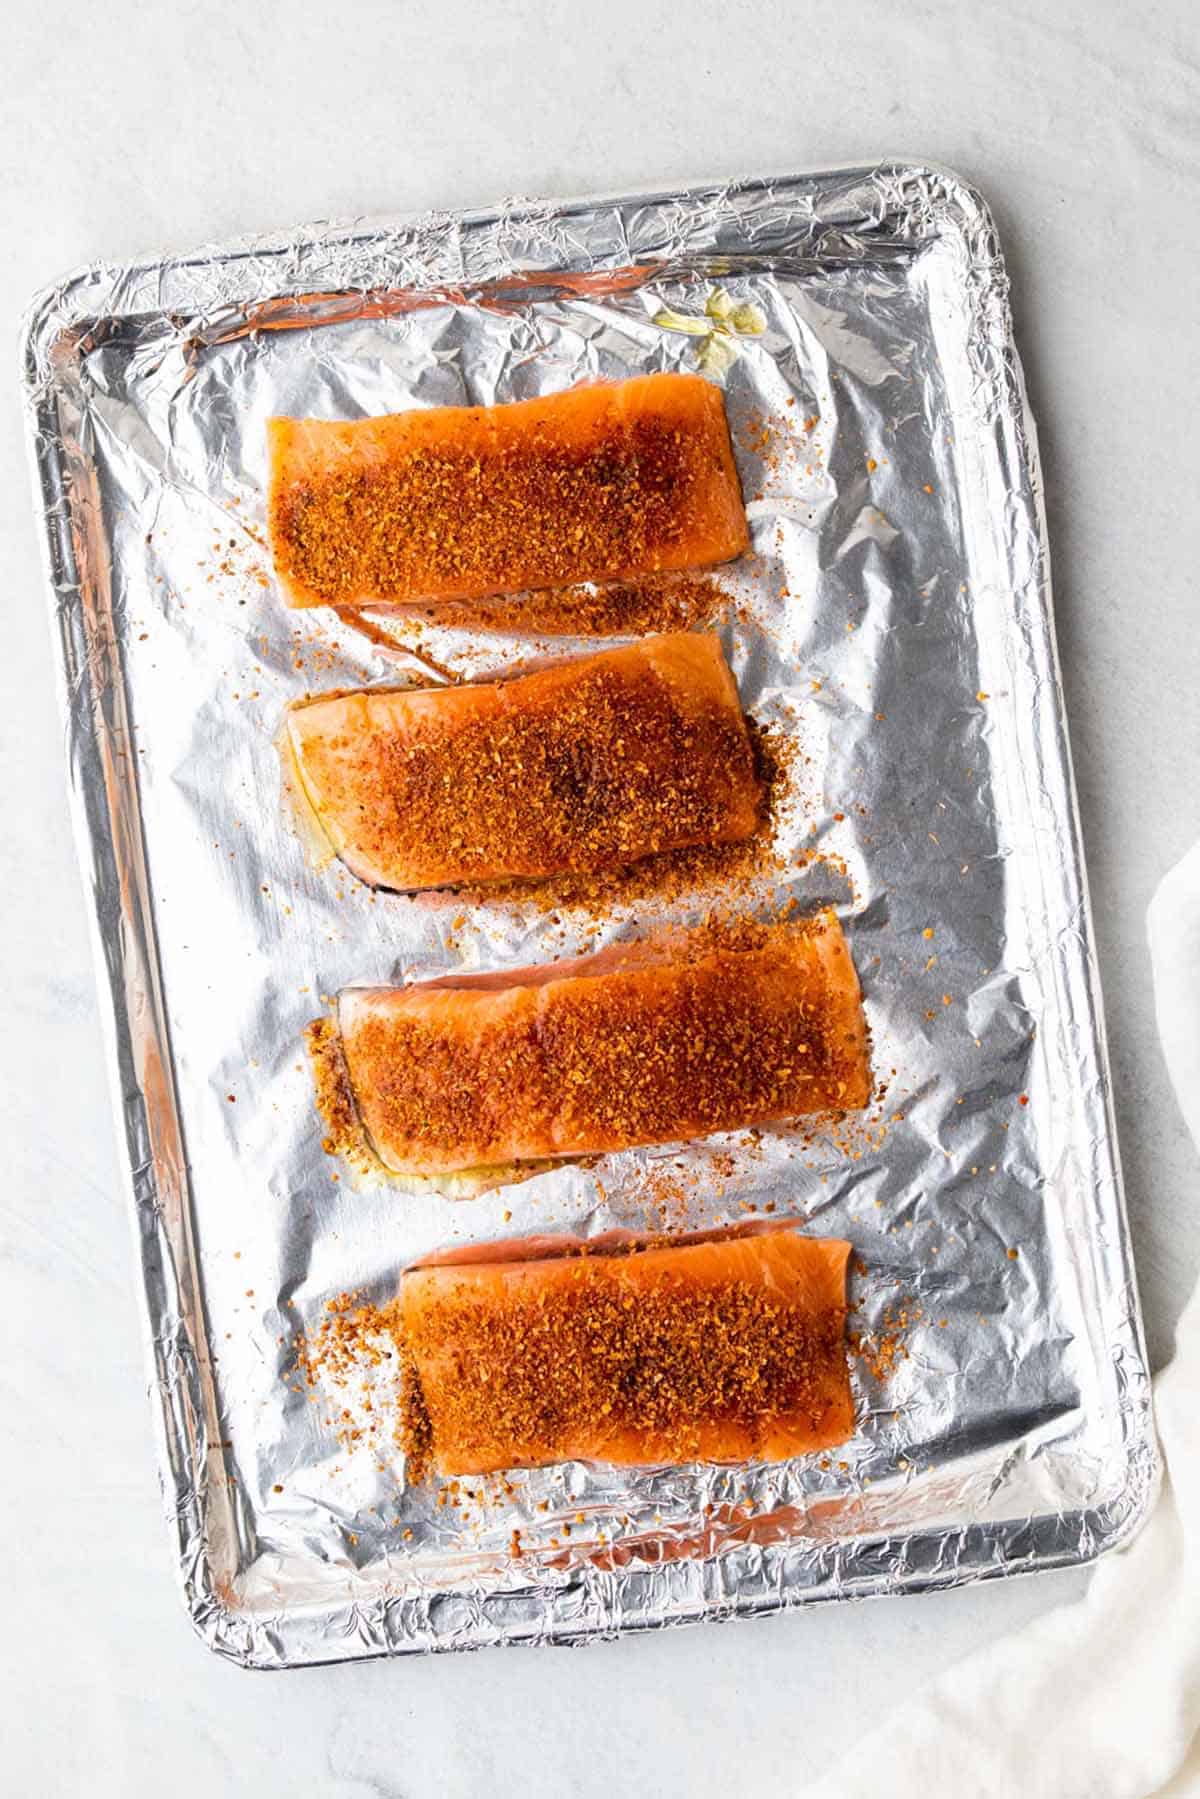 Four salmon fillets topped with olive oil and taco seasoning on a baking sheet lined with aluminum foil, as seen from above